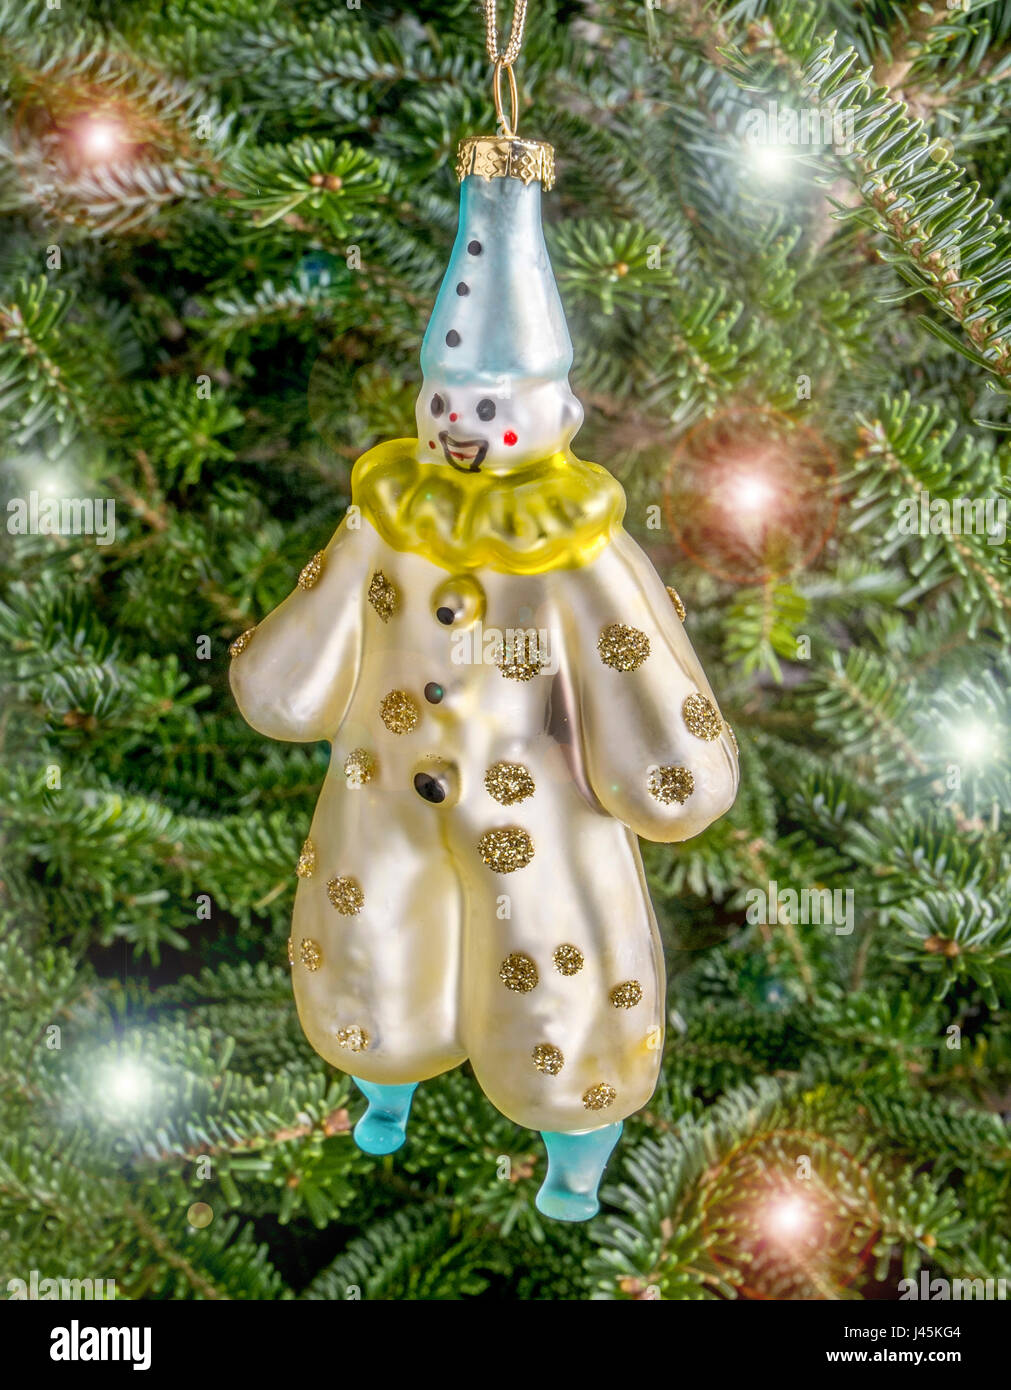 Christmas bauble hanging from a tree in the shape of a Festive Clown Stock Photo